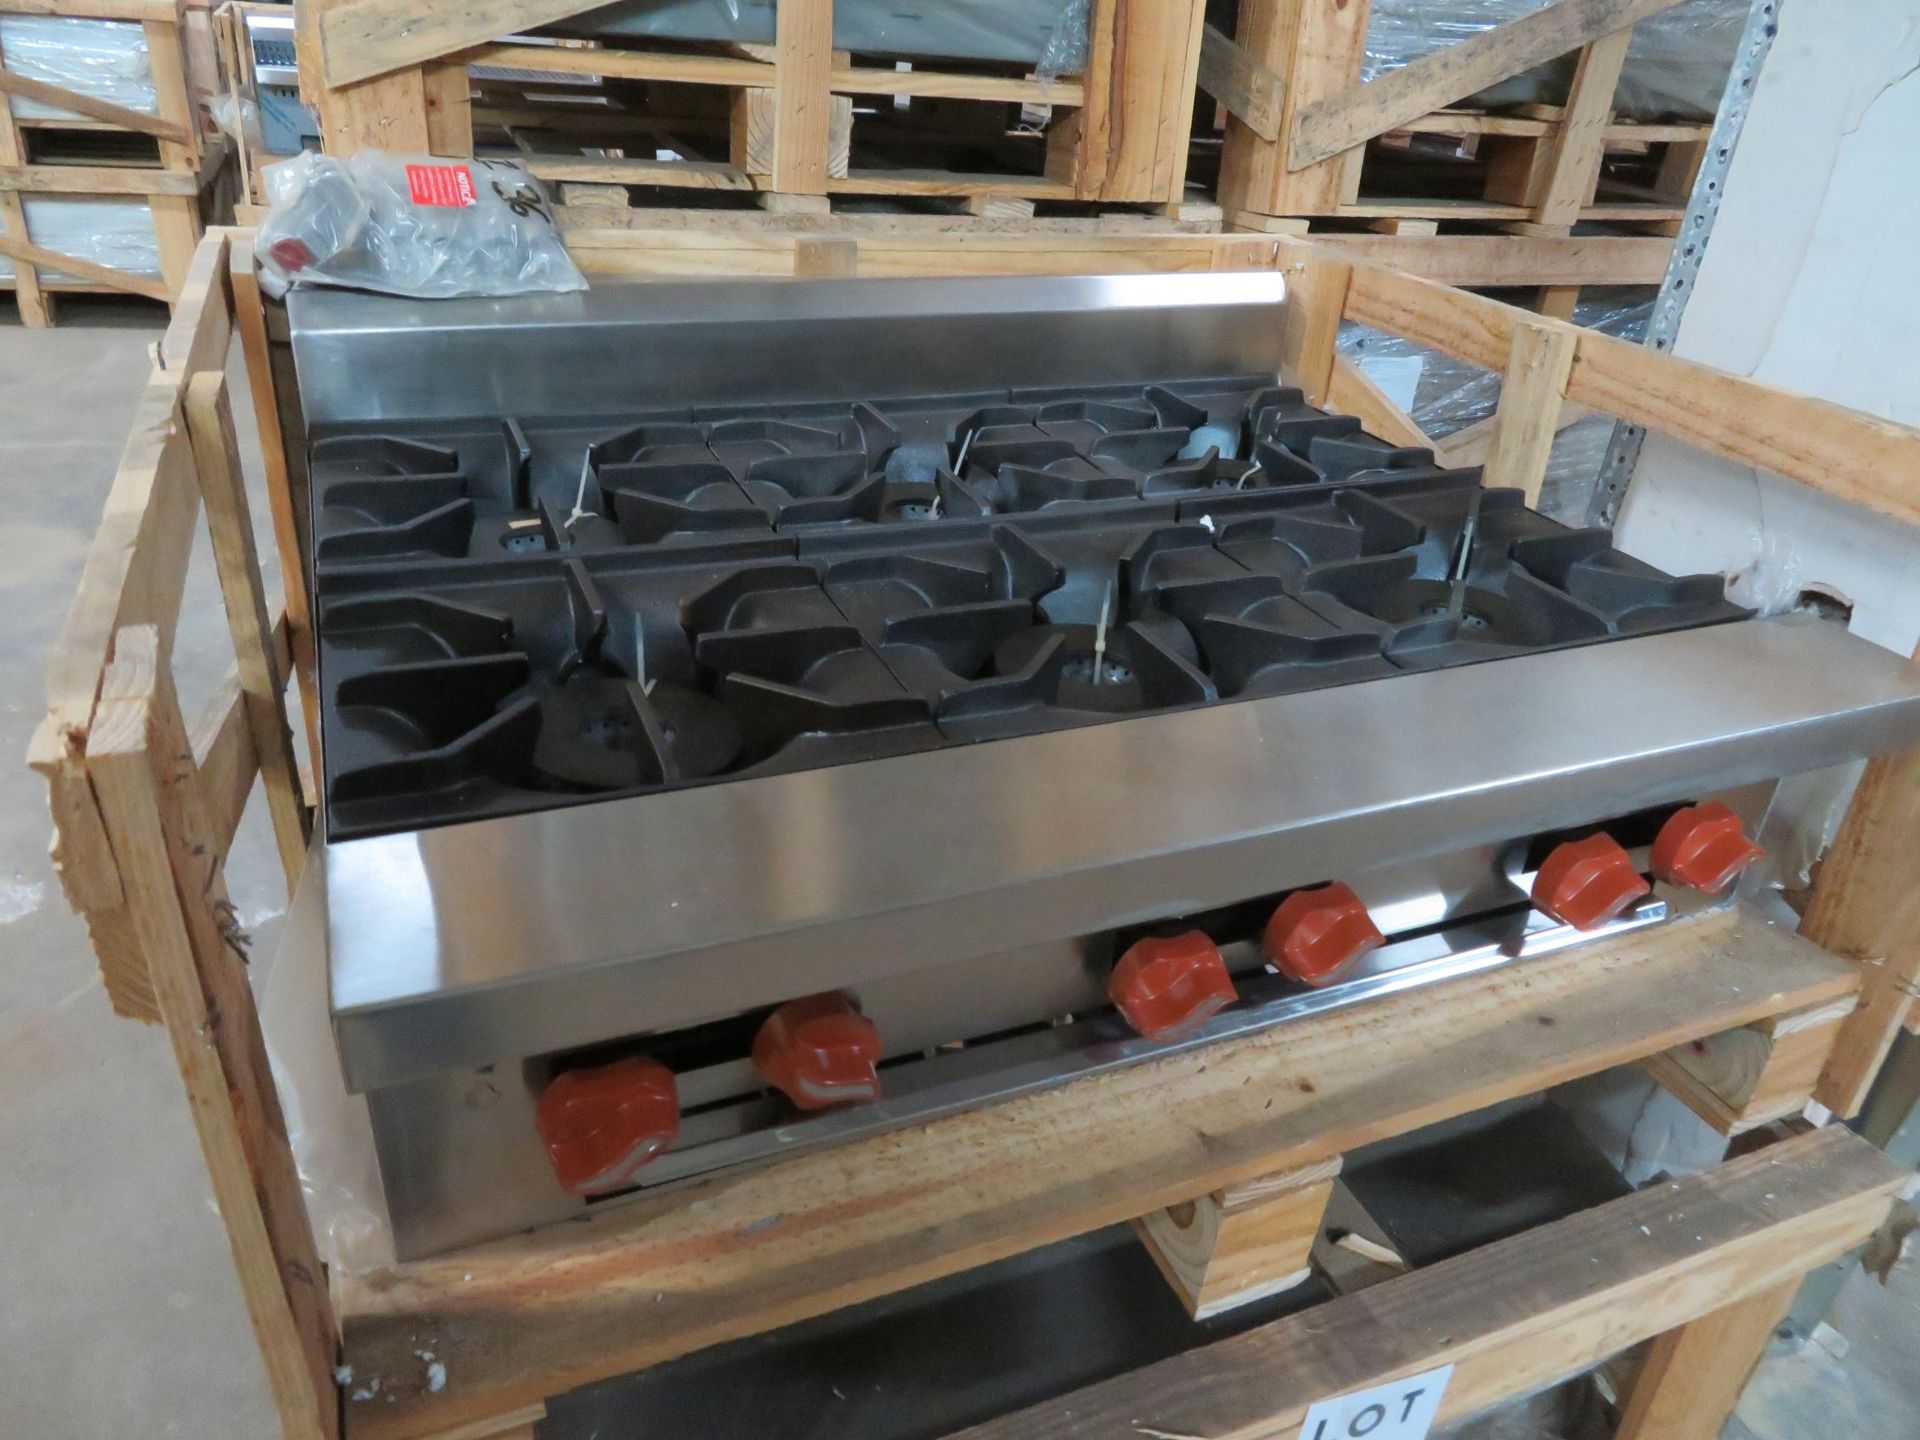 Brand New SIERRA gas 36"hot plate with 6 burners, Mod #SR-HP-6-36, approx. 36"w x 30"d x 9"h